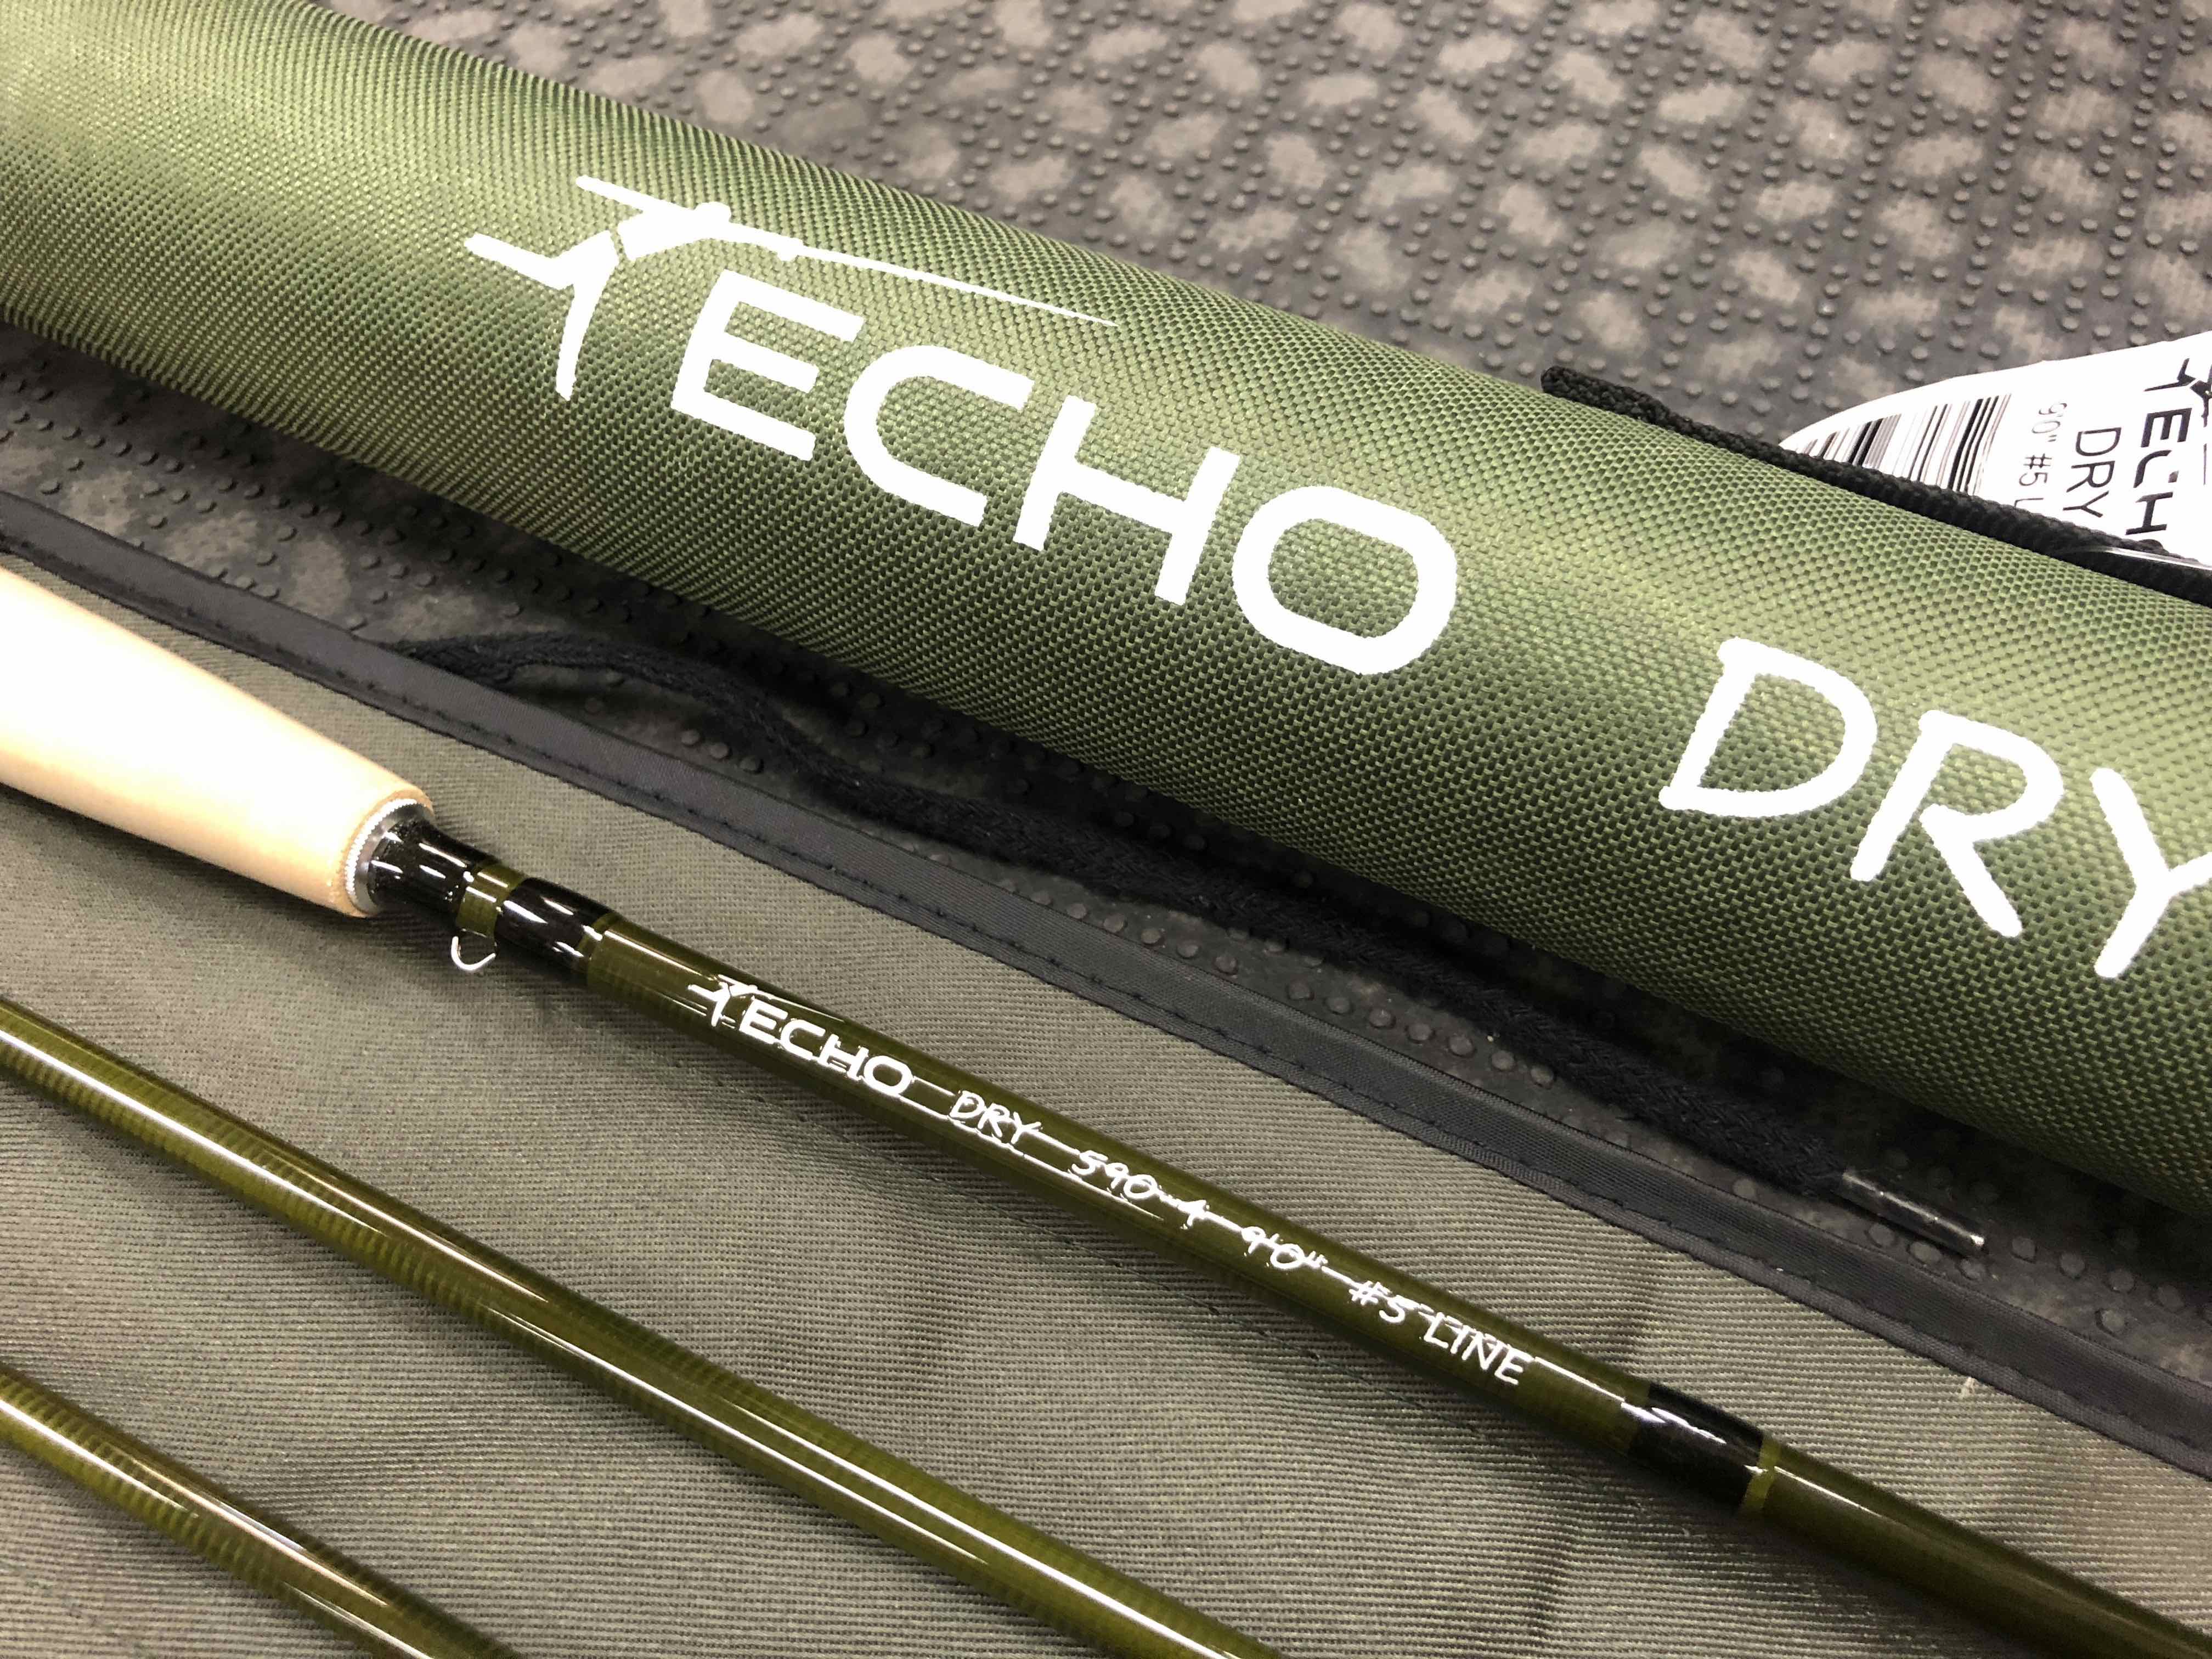 SOLD! - Echo Dry Fly Rod - 590-4 - 9' 5wt 4pc - BRAND NEW! - $125